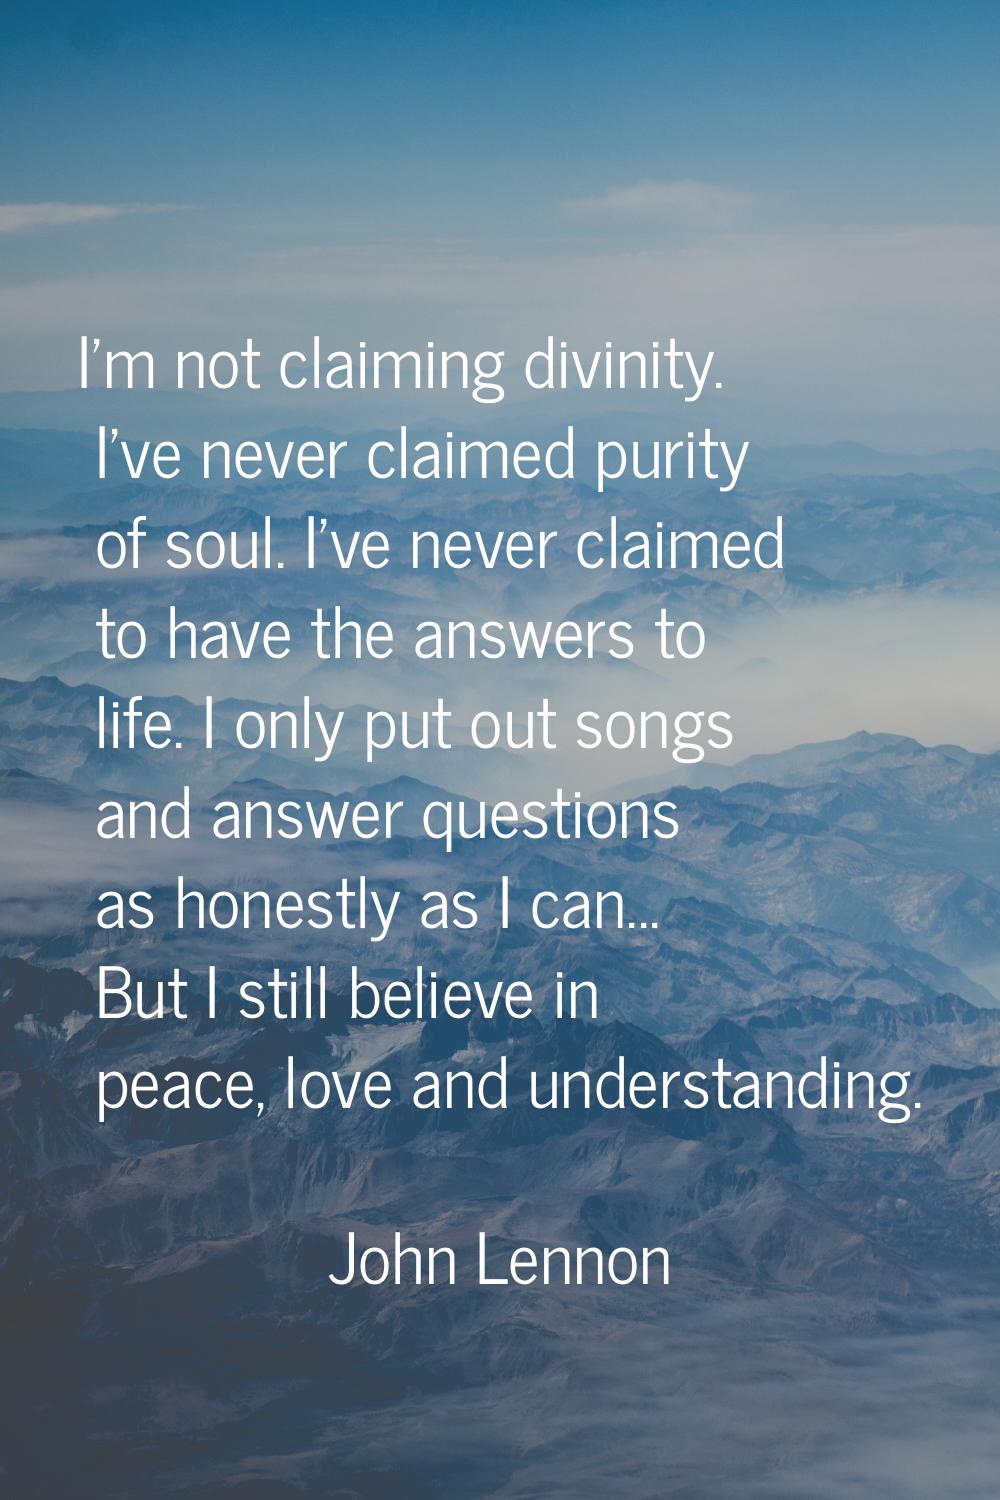 I'm not claiming divinity. I've never claimed purity of soul. I've never claimed to have the answer